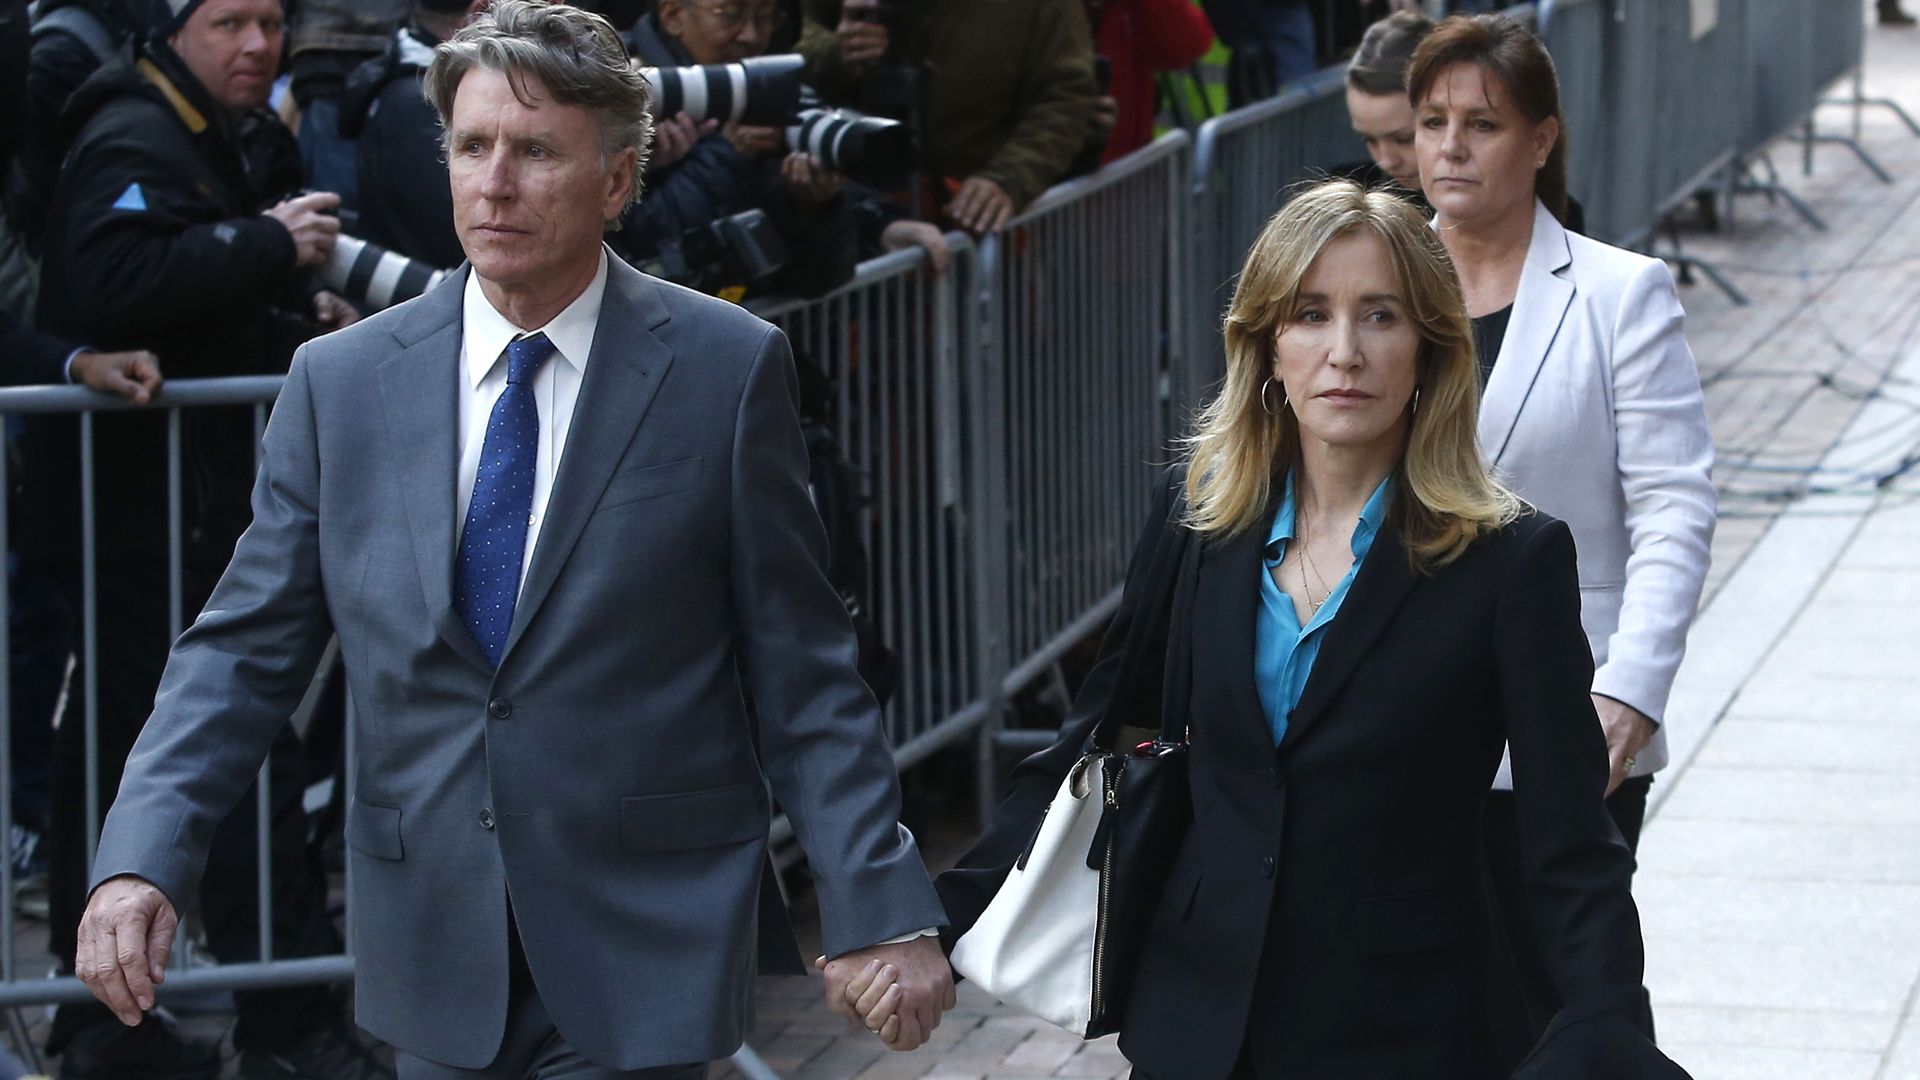 Actress Felicity Huffman with her husband outside Boston courthouse